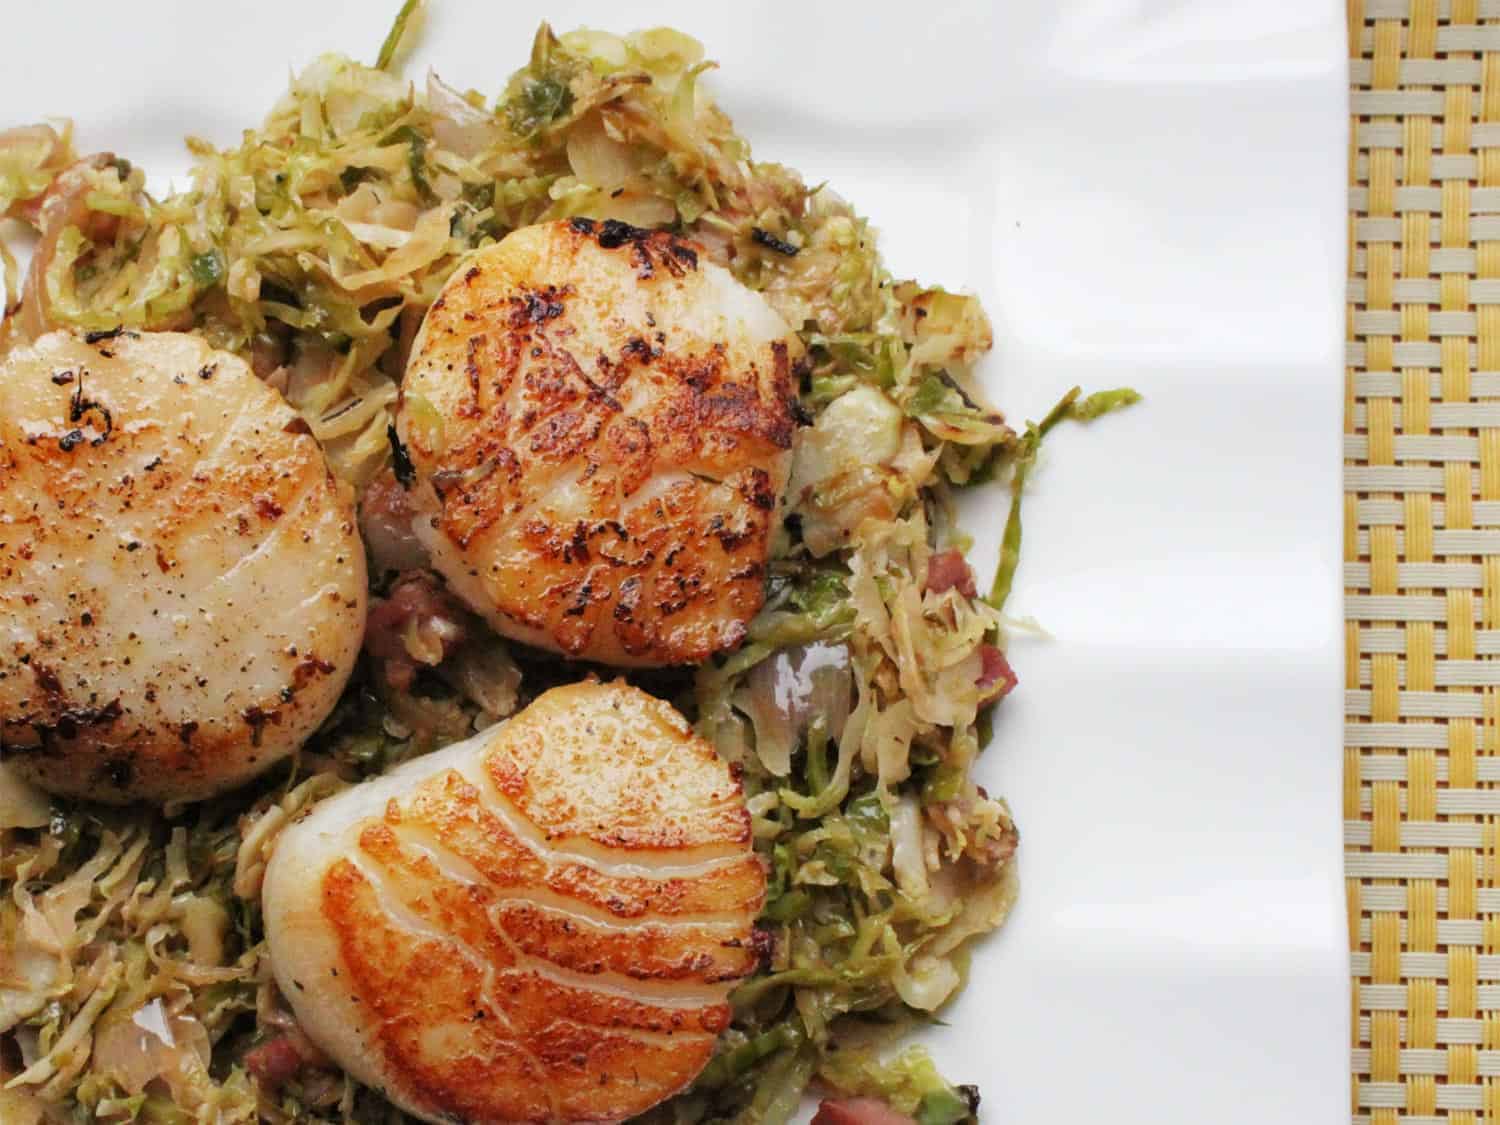 Seared Scallops with Pancetta and Brussel Sprouts